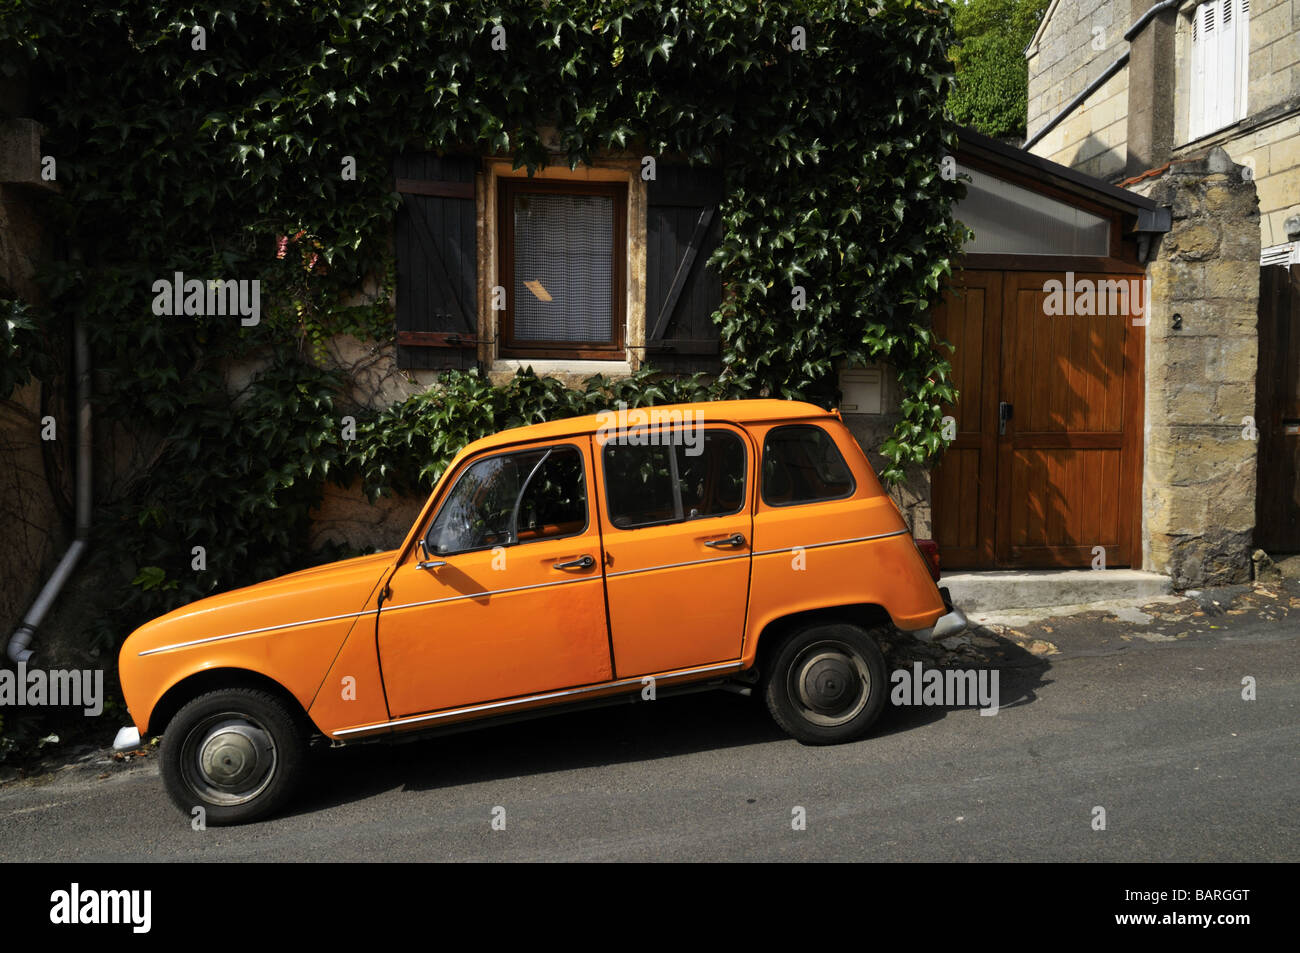 Old Renault car, Chinon, France. Stock Photo